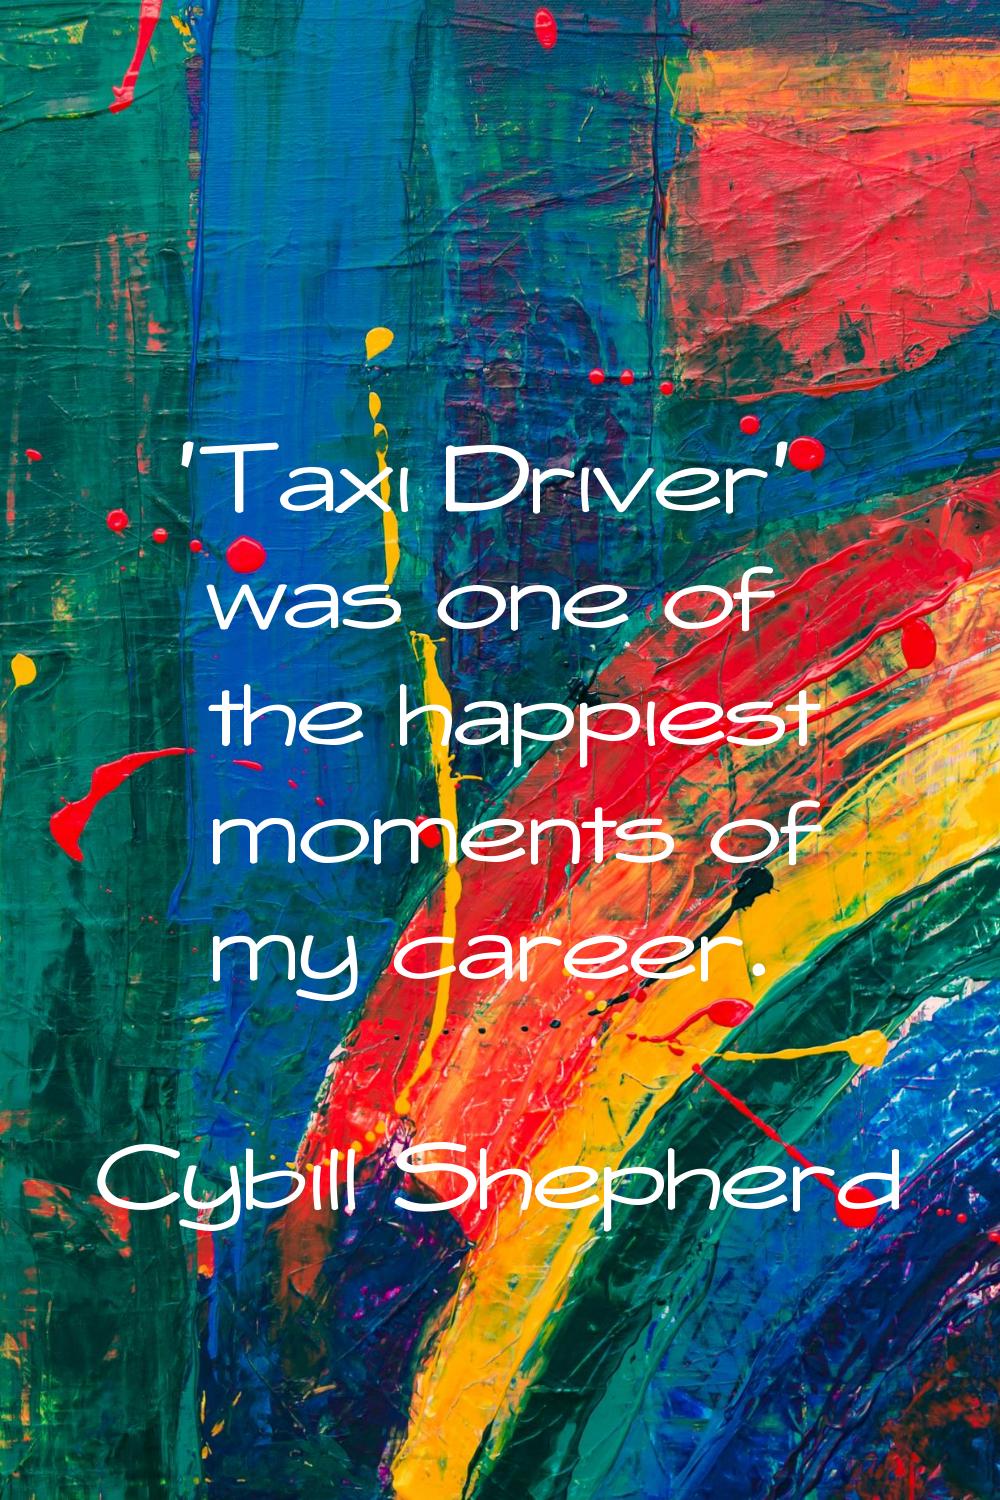 'Taxi Driver' was one of the happiest moments of my career.